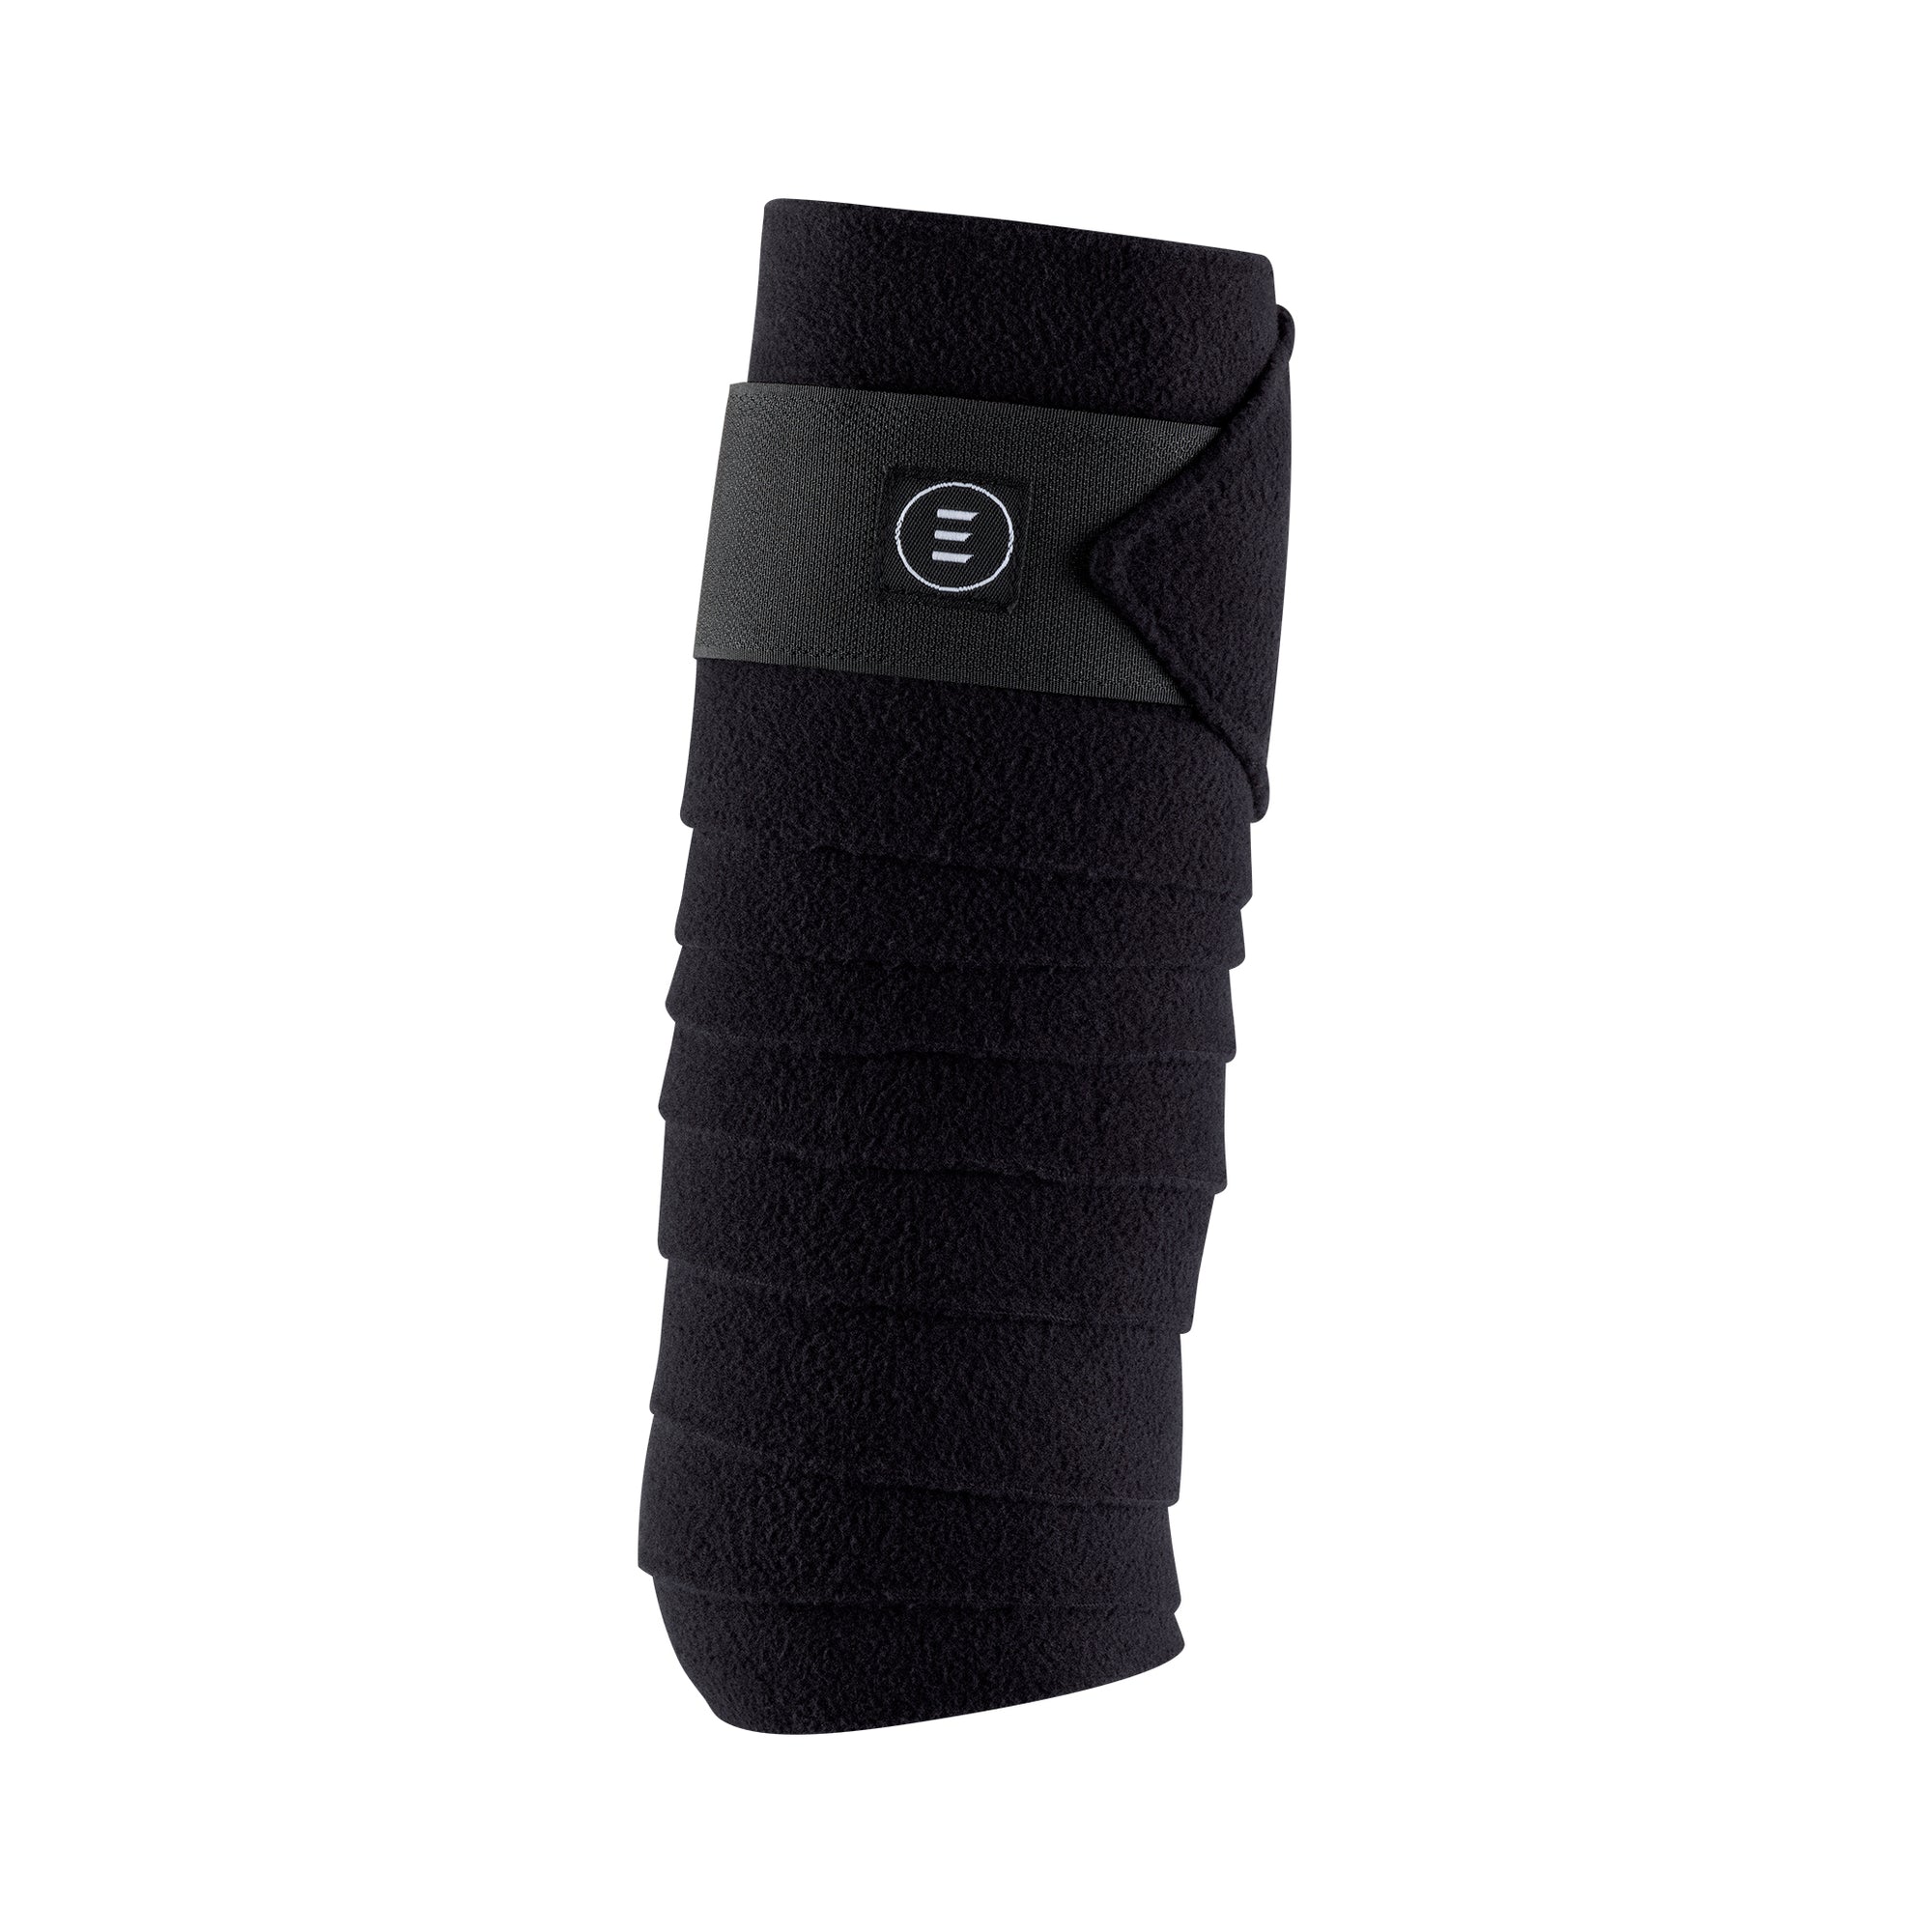 The Essential Polo Wrap Features a double sided Far Infrared Fleece shown to help stimulate blood flow, reduce inflammation and lessen pain.